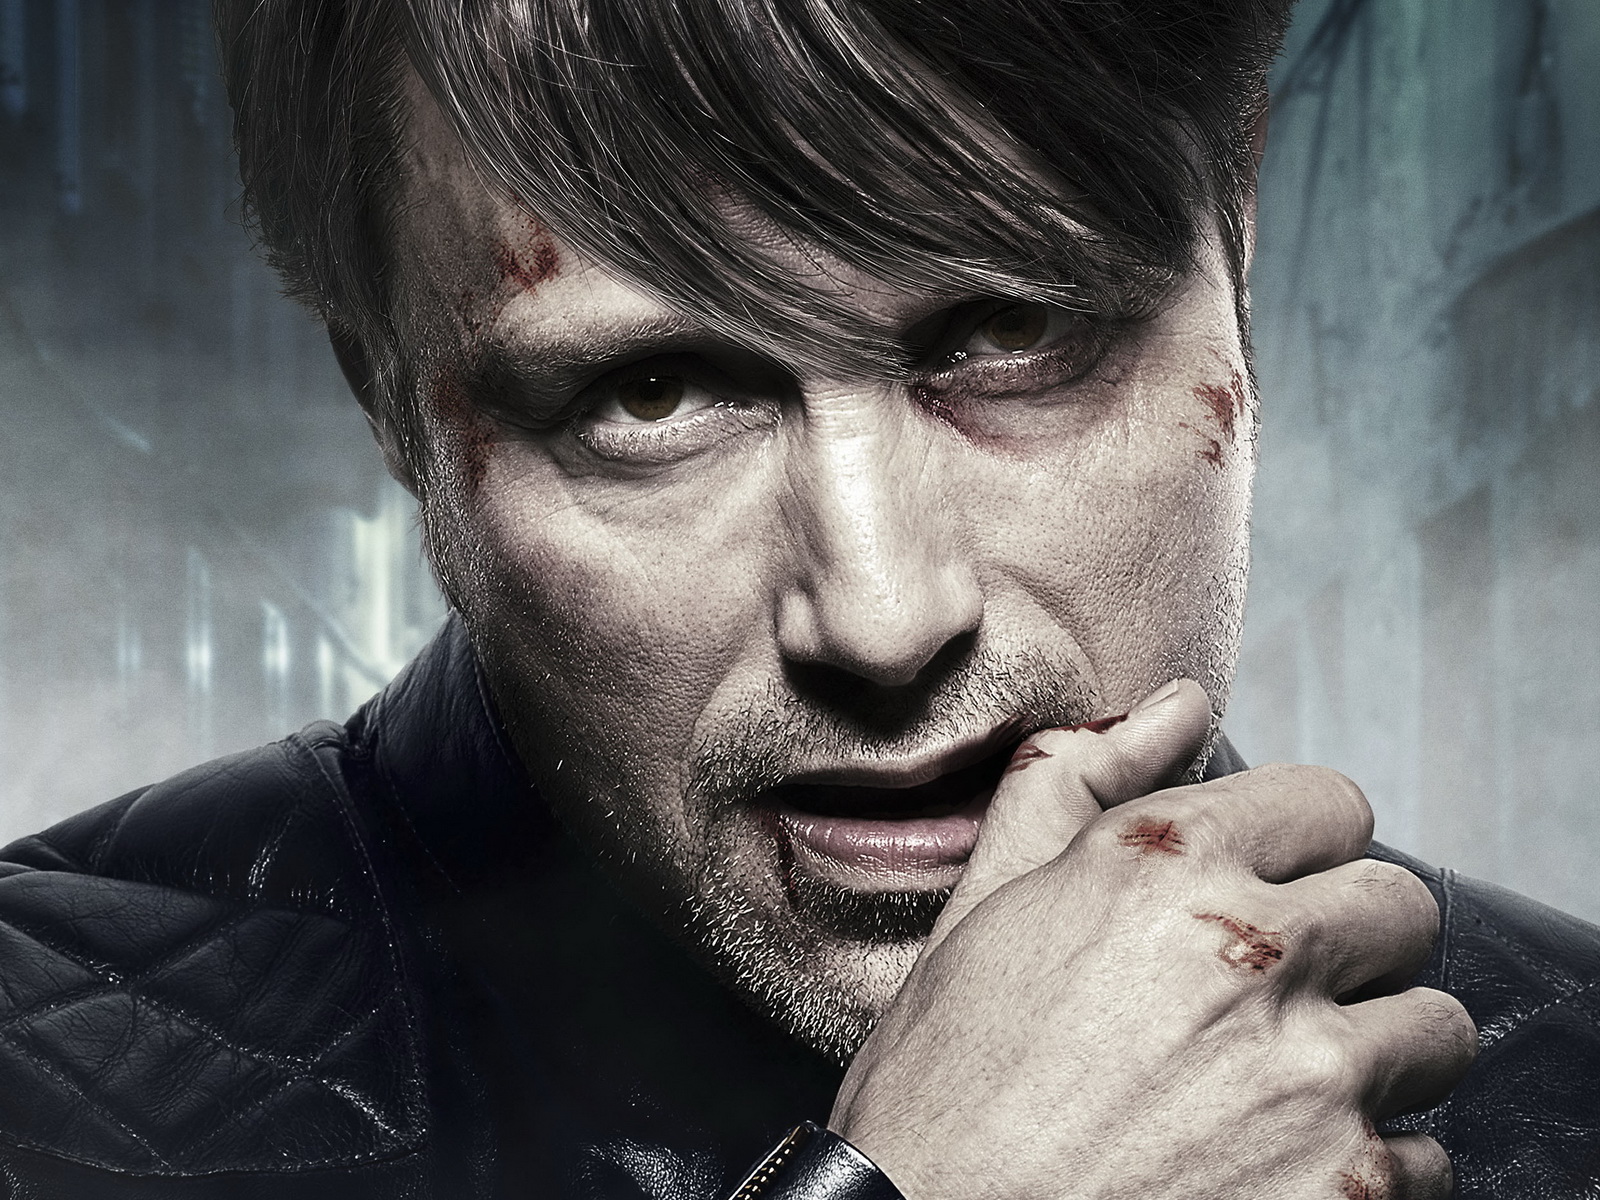 Awesome Hannibal Black Darkness wallpaper  FREE Best pics